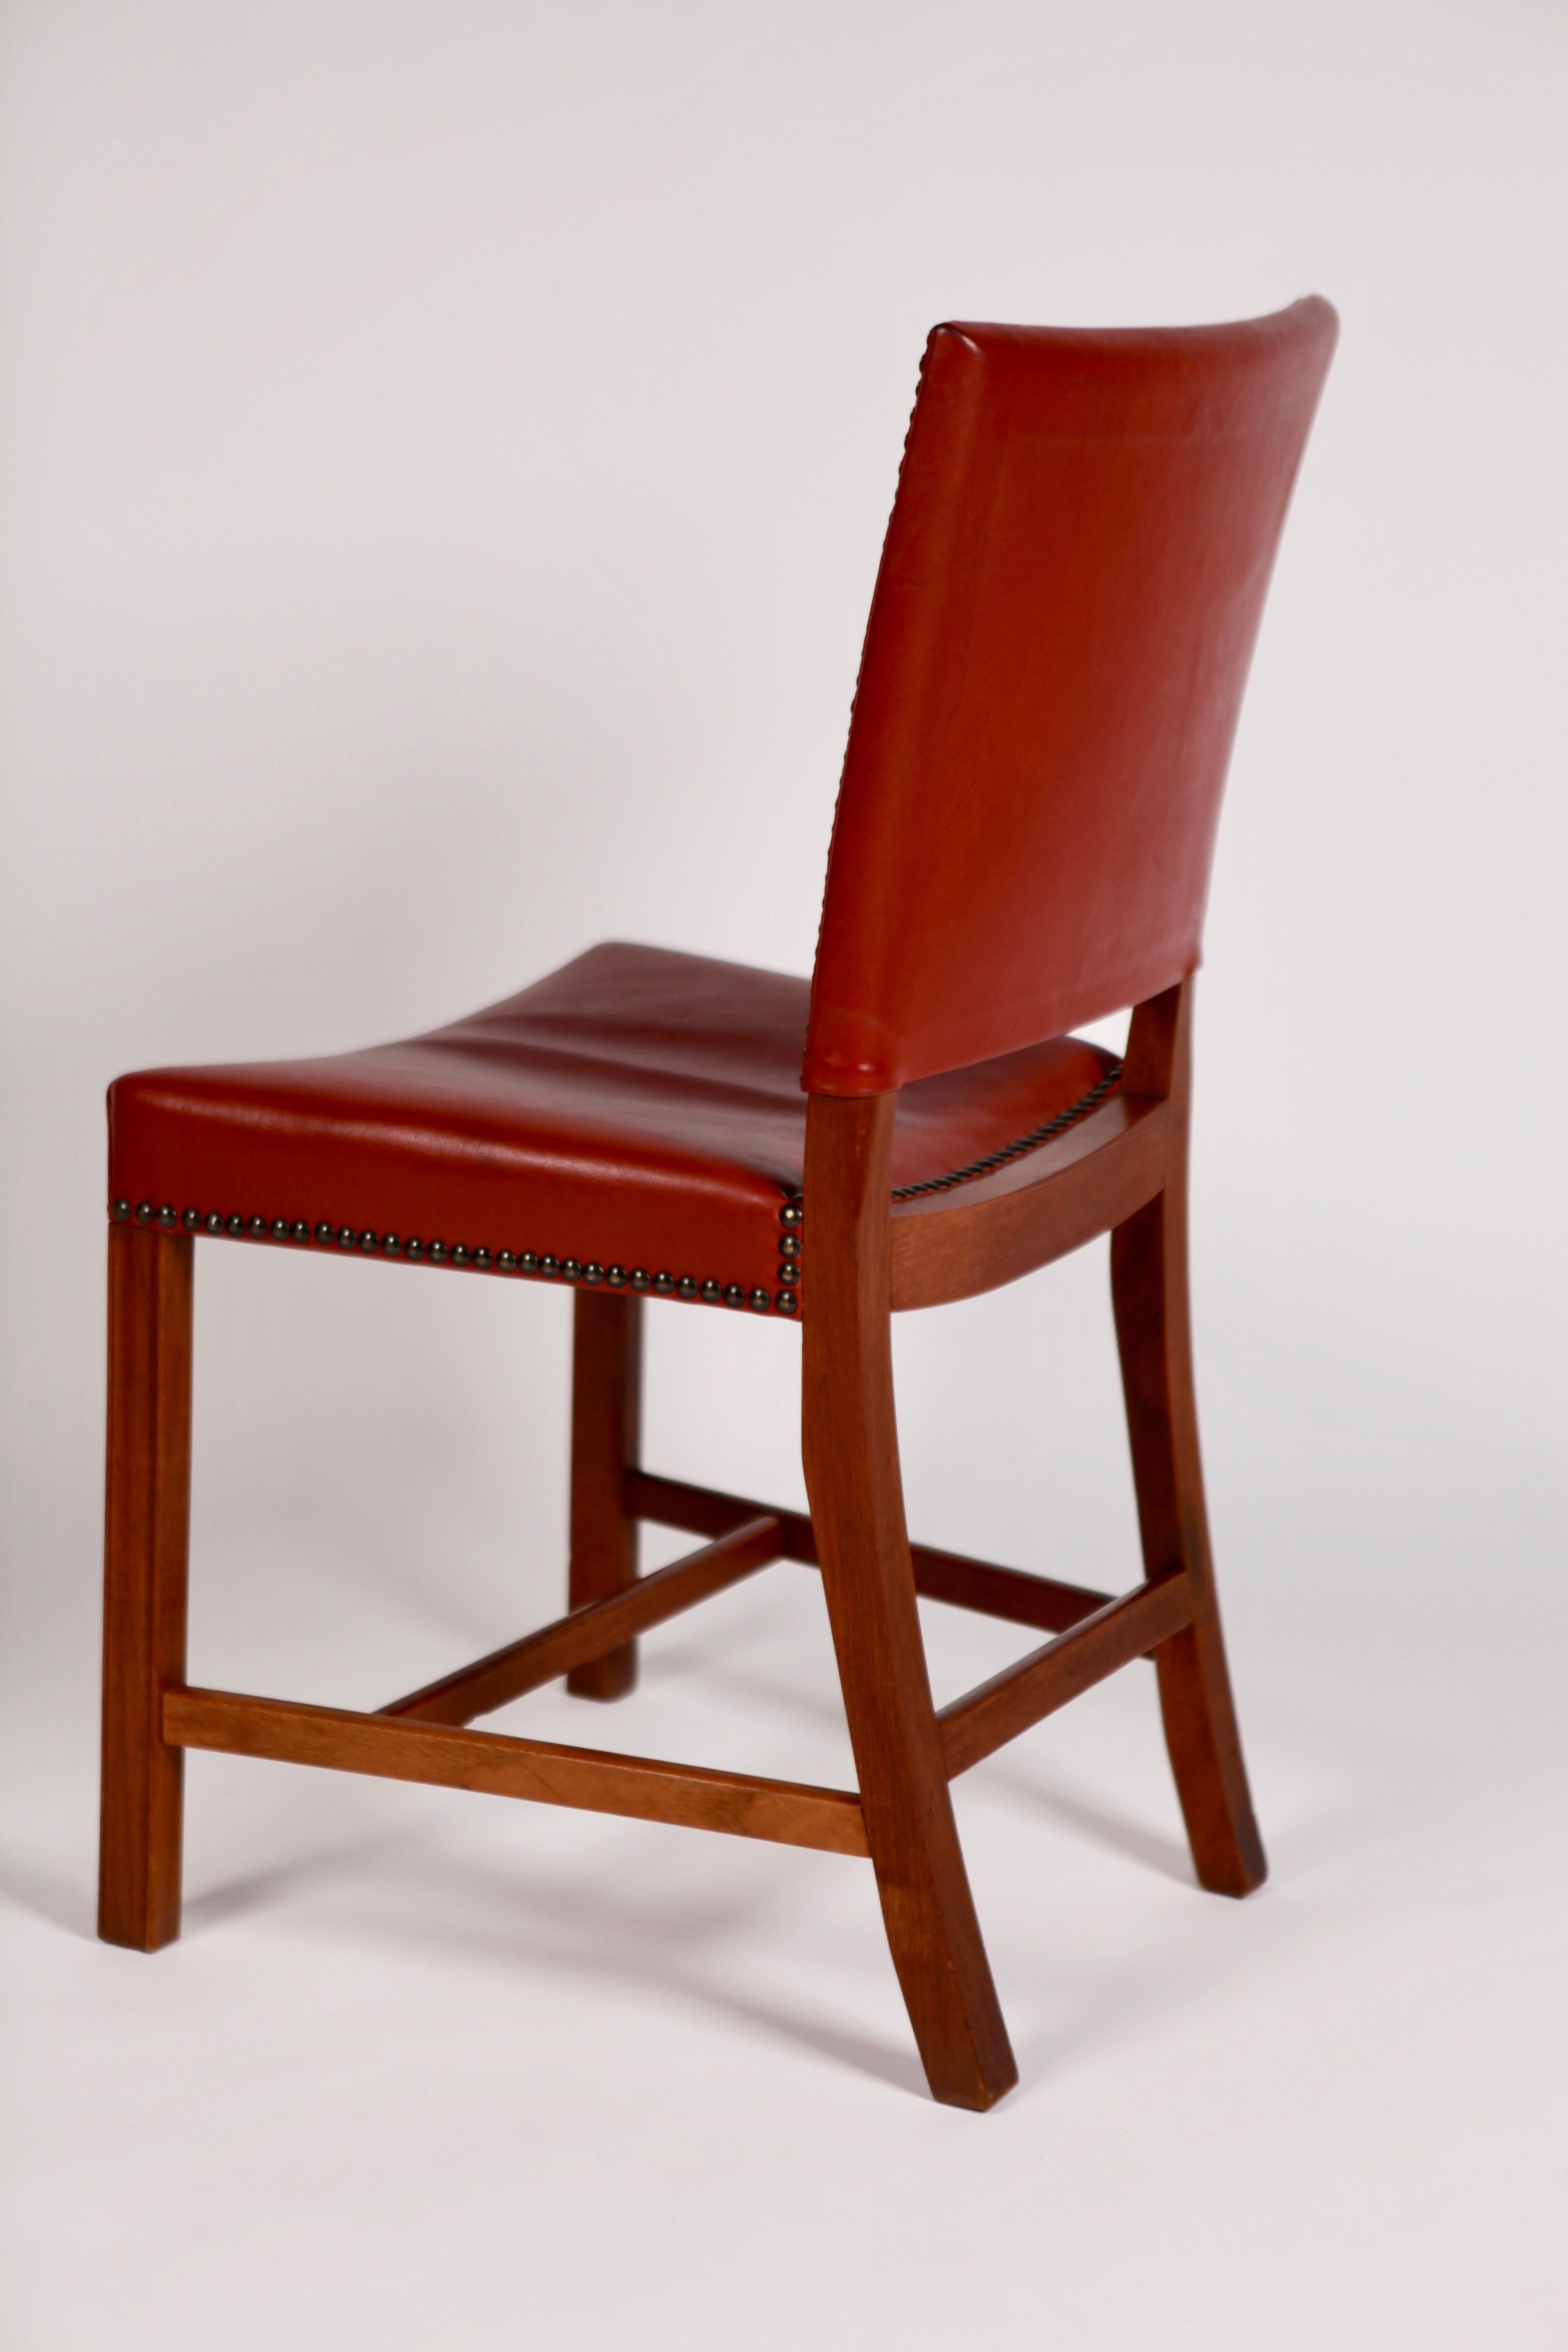 Mid-20th Century Kaare Klint, Barcelona Chair, Red Leather and Mahogany, Denmark, 1940s